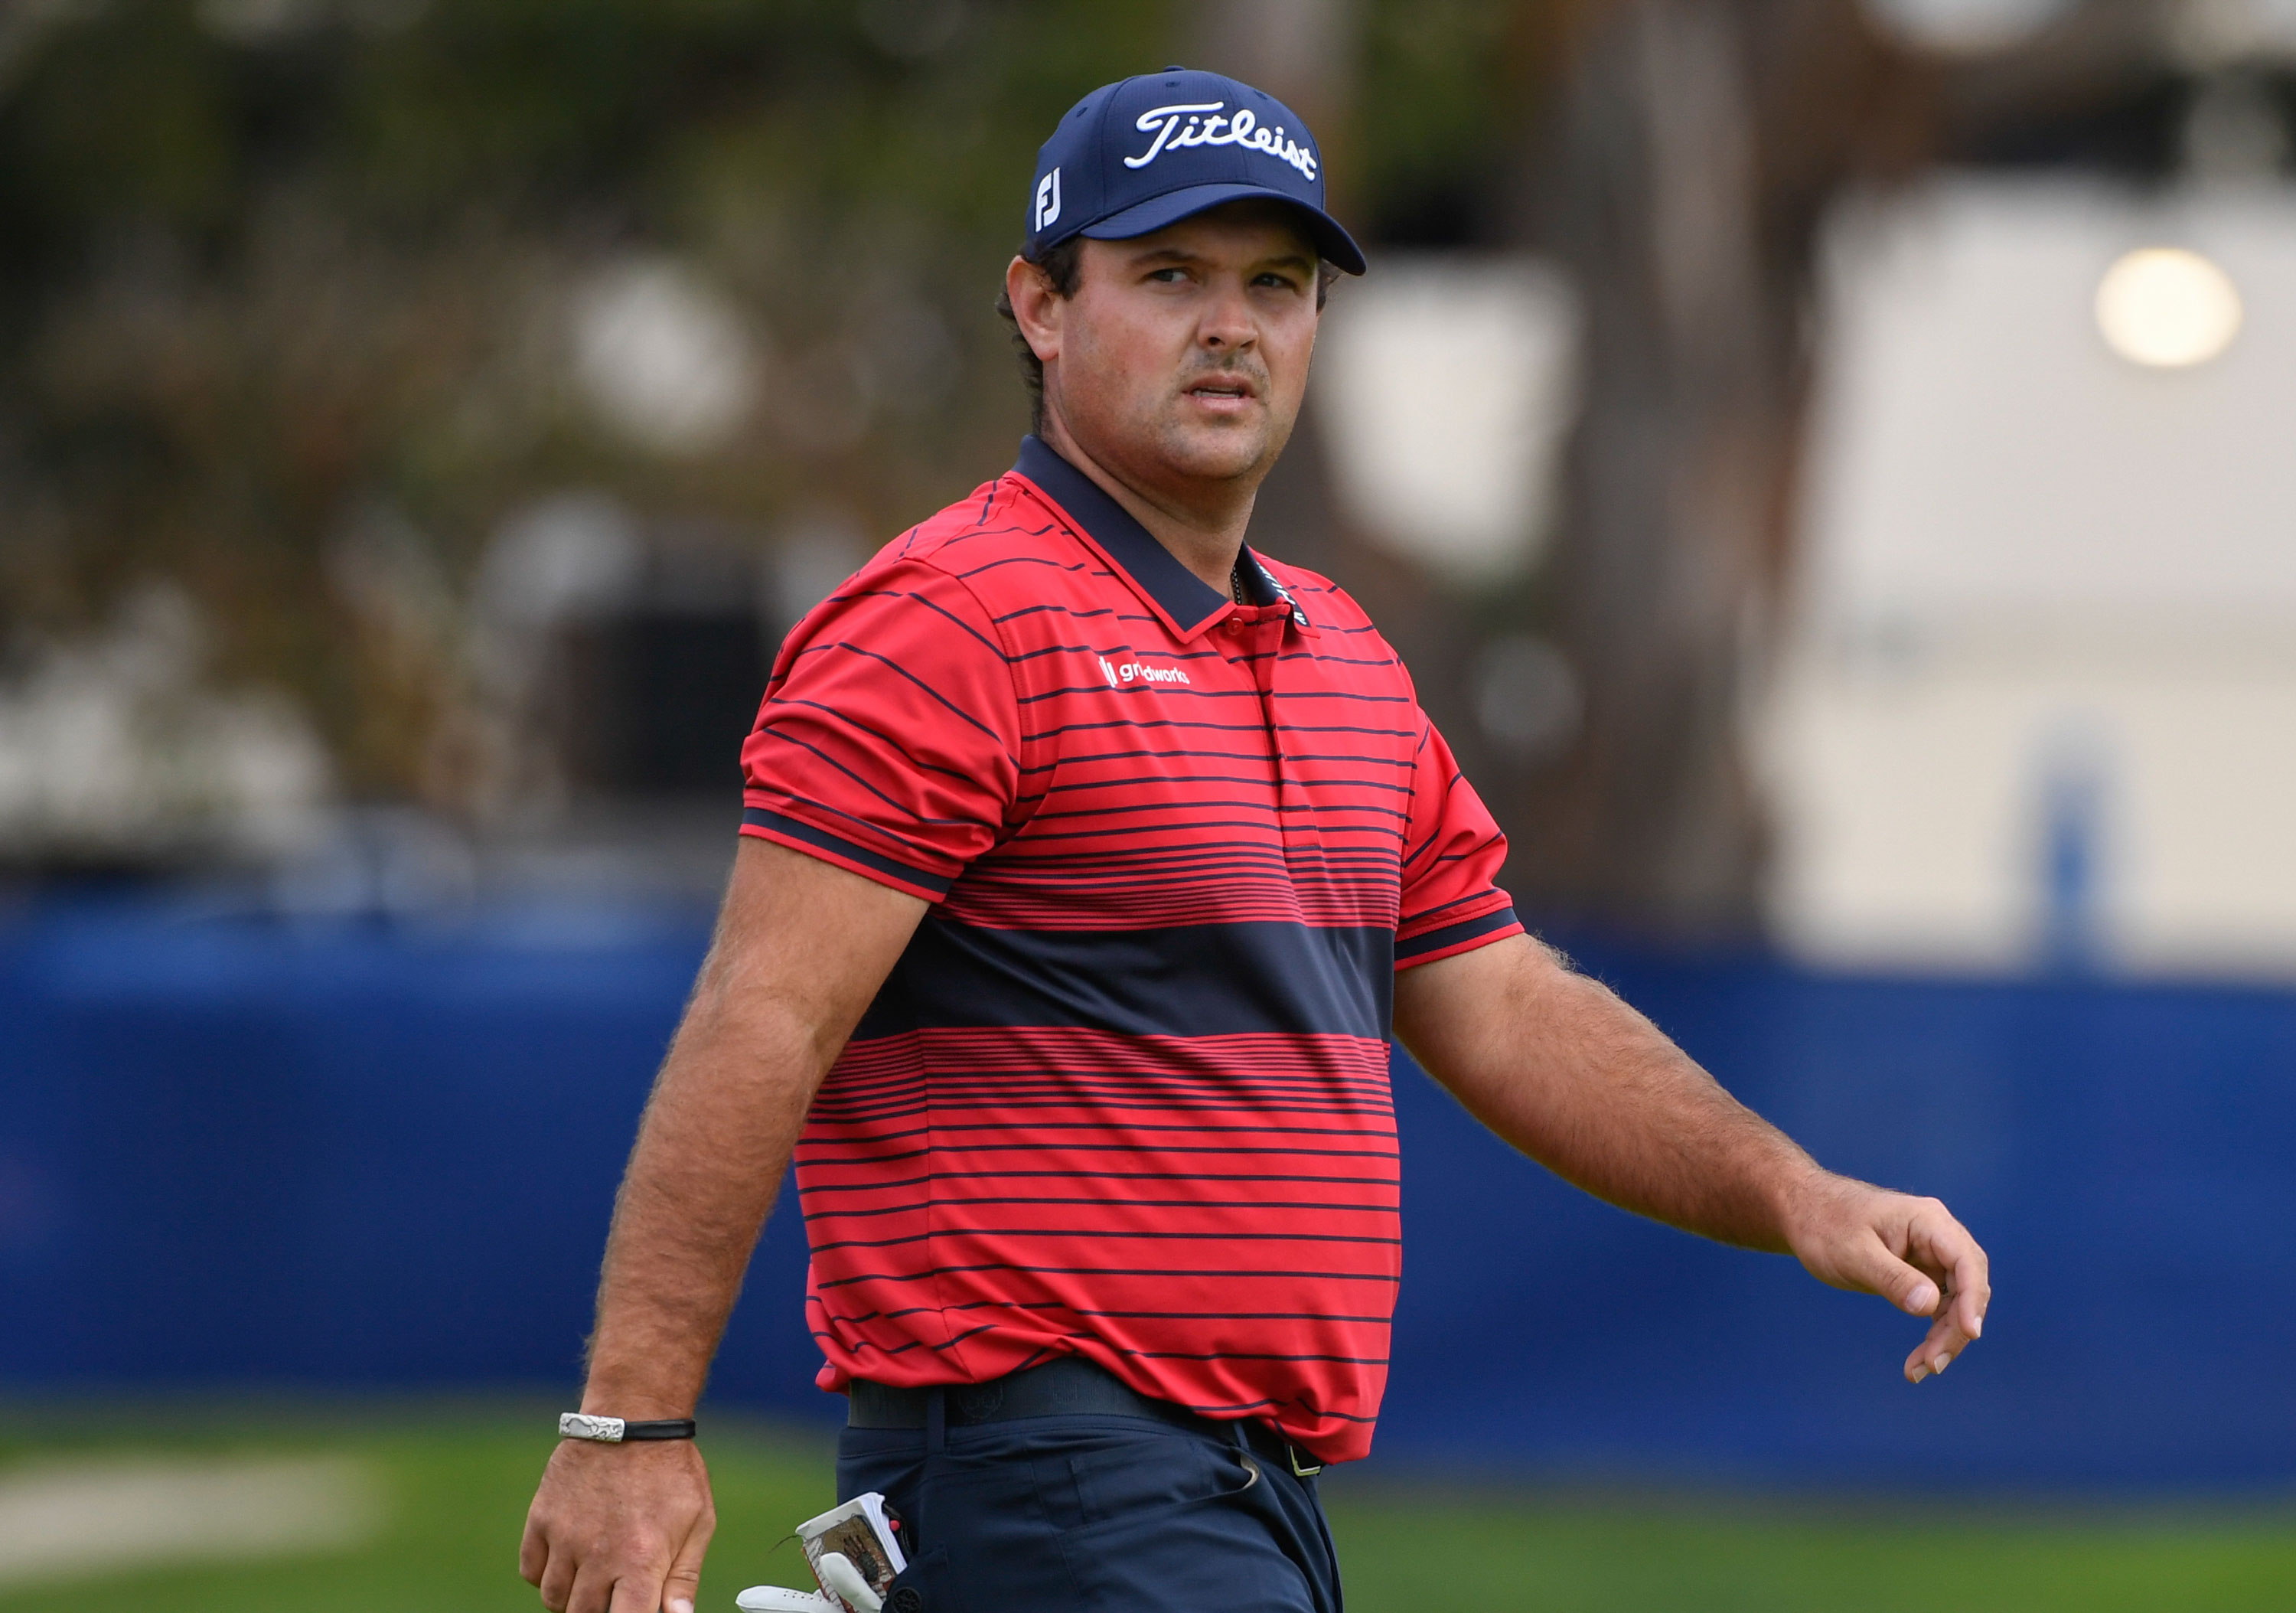 Patrick Reeds runaway win in the Farmers Insurance Open will be shadowed by questions and controversy Golf News and Tour Information GolfDigest